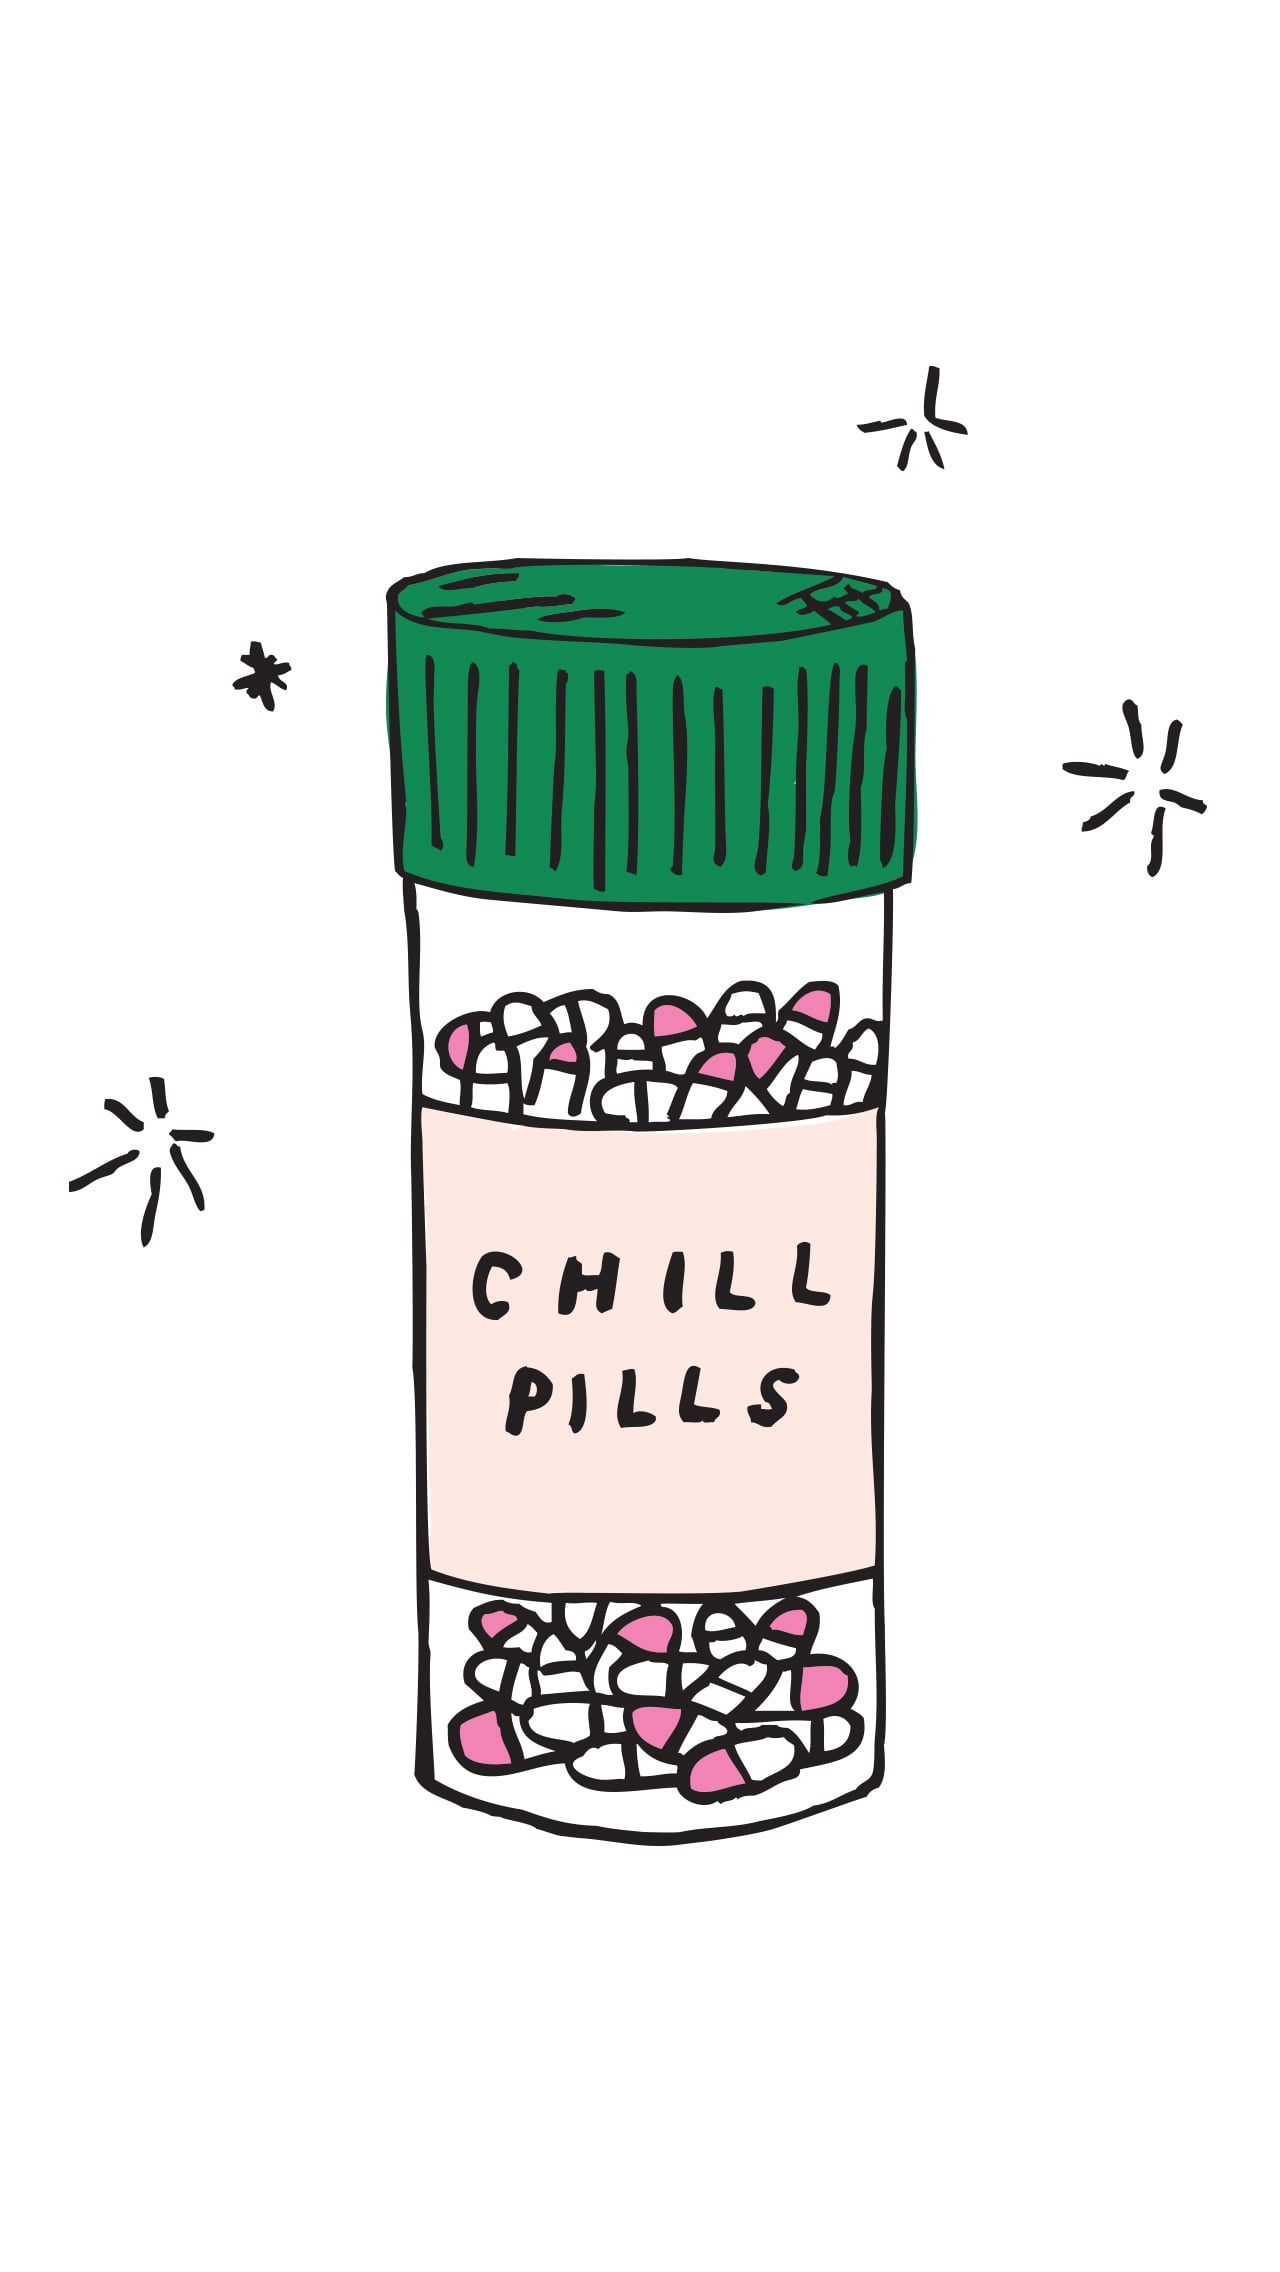 Chill Pills Free and Fun iPhone Wallpaper to Liven Up Your Life